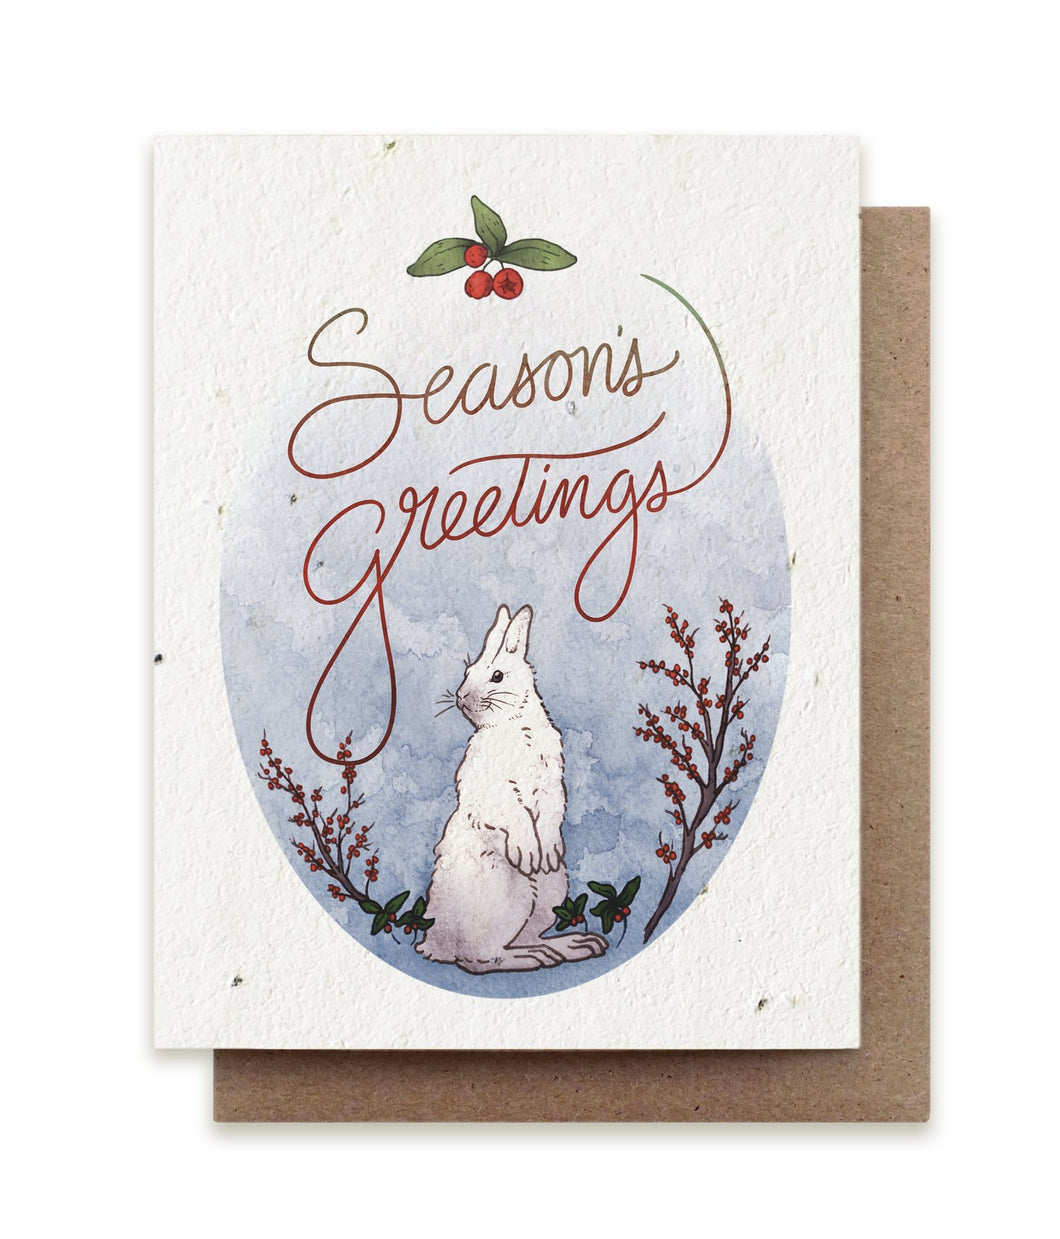 A greeting card made of seed paper shows an illustration of a white snowshoe hare surrounded by holly branches and the words 